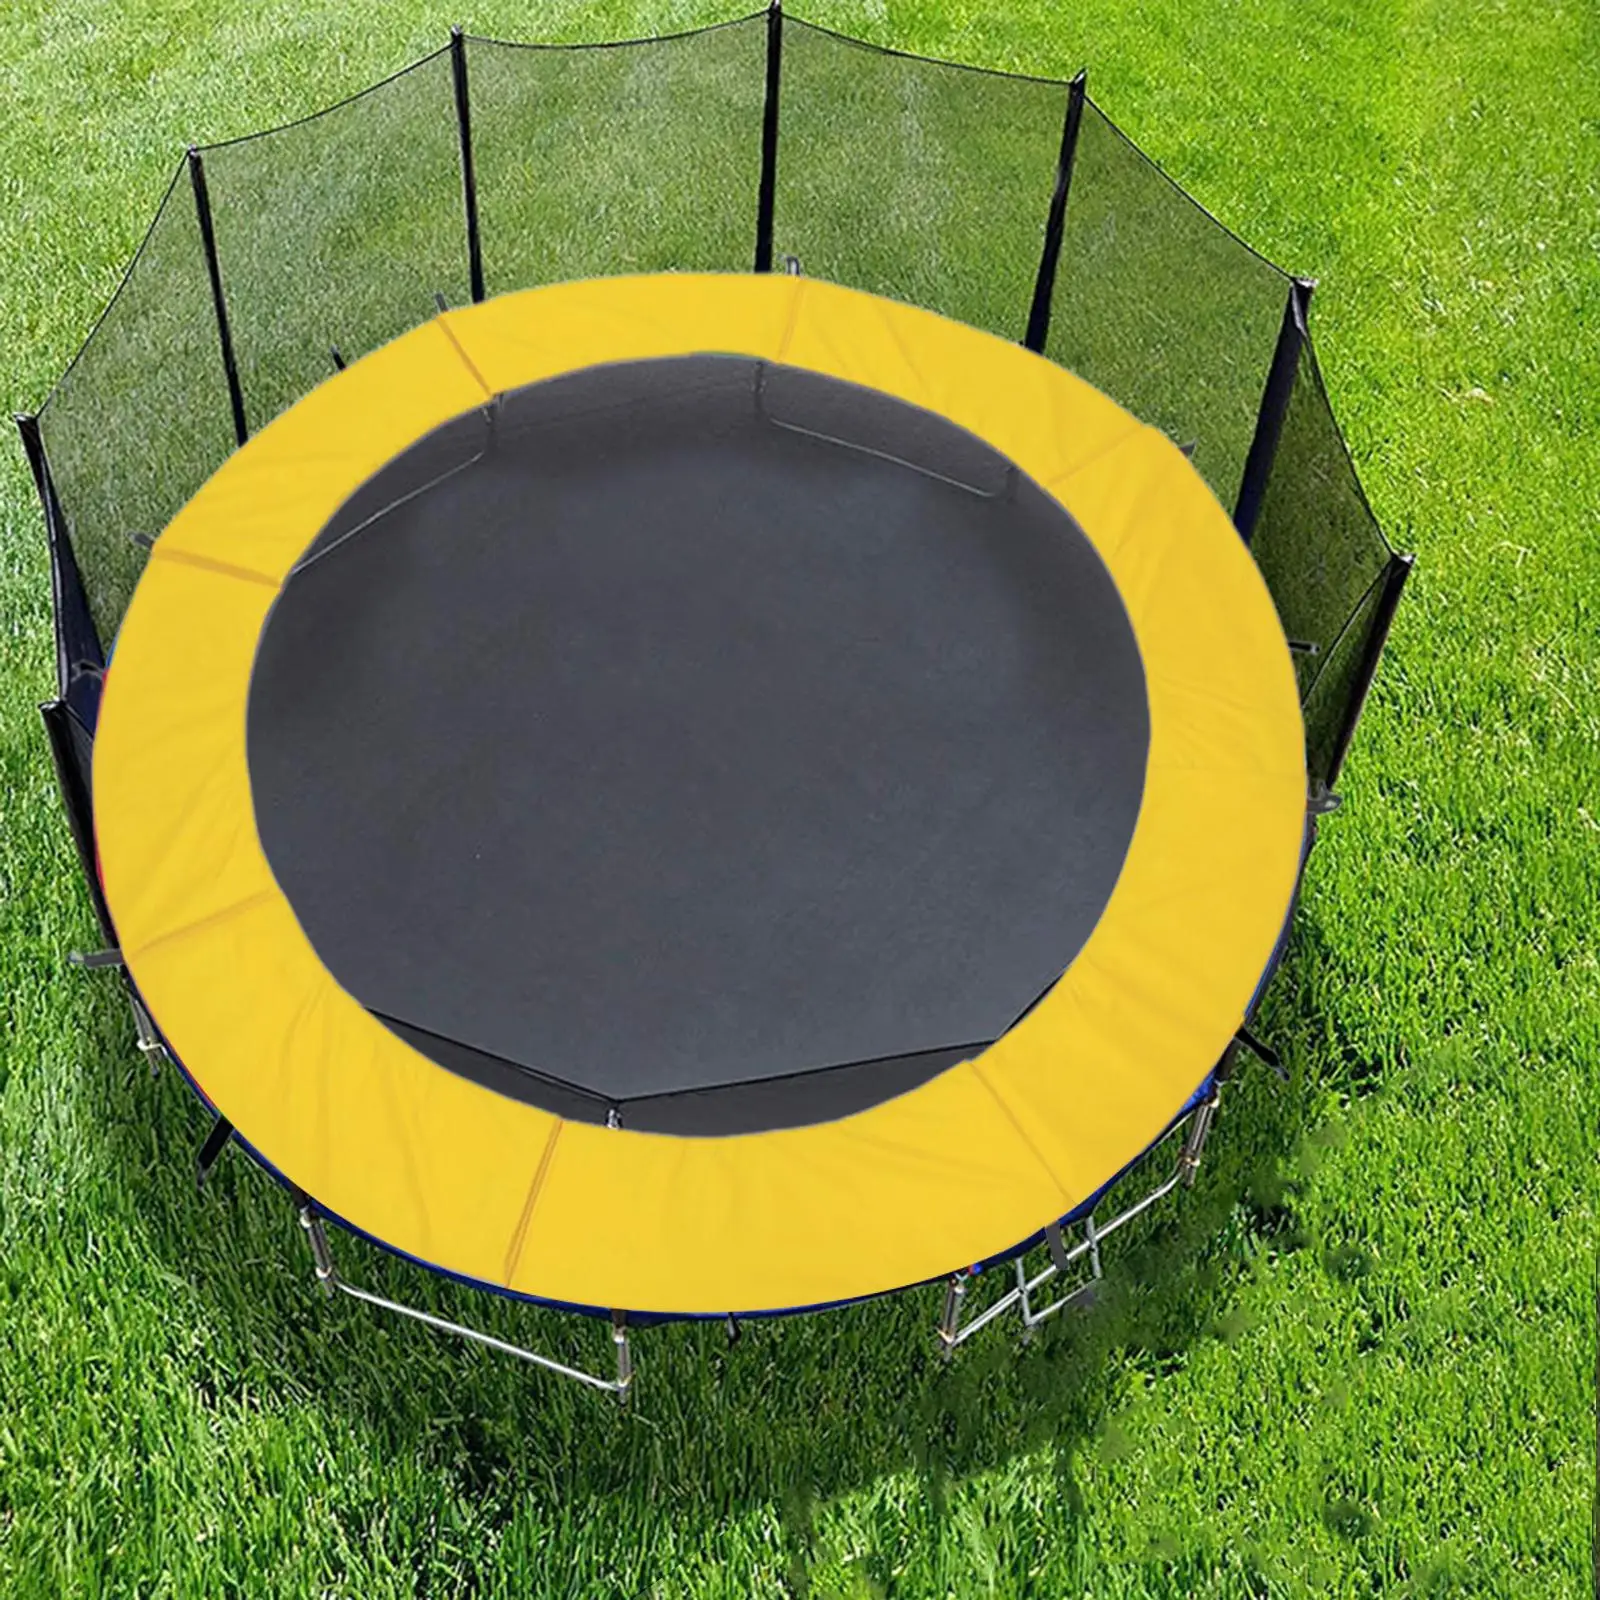 Trampoline Pad Cover Jumping Bed Cover Waterproof Tear Resistant Trampoline